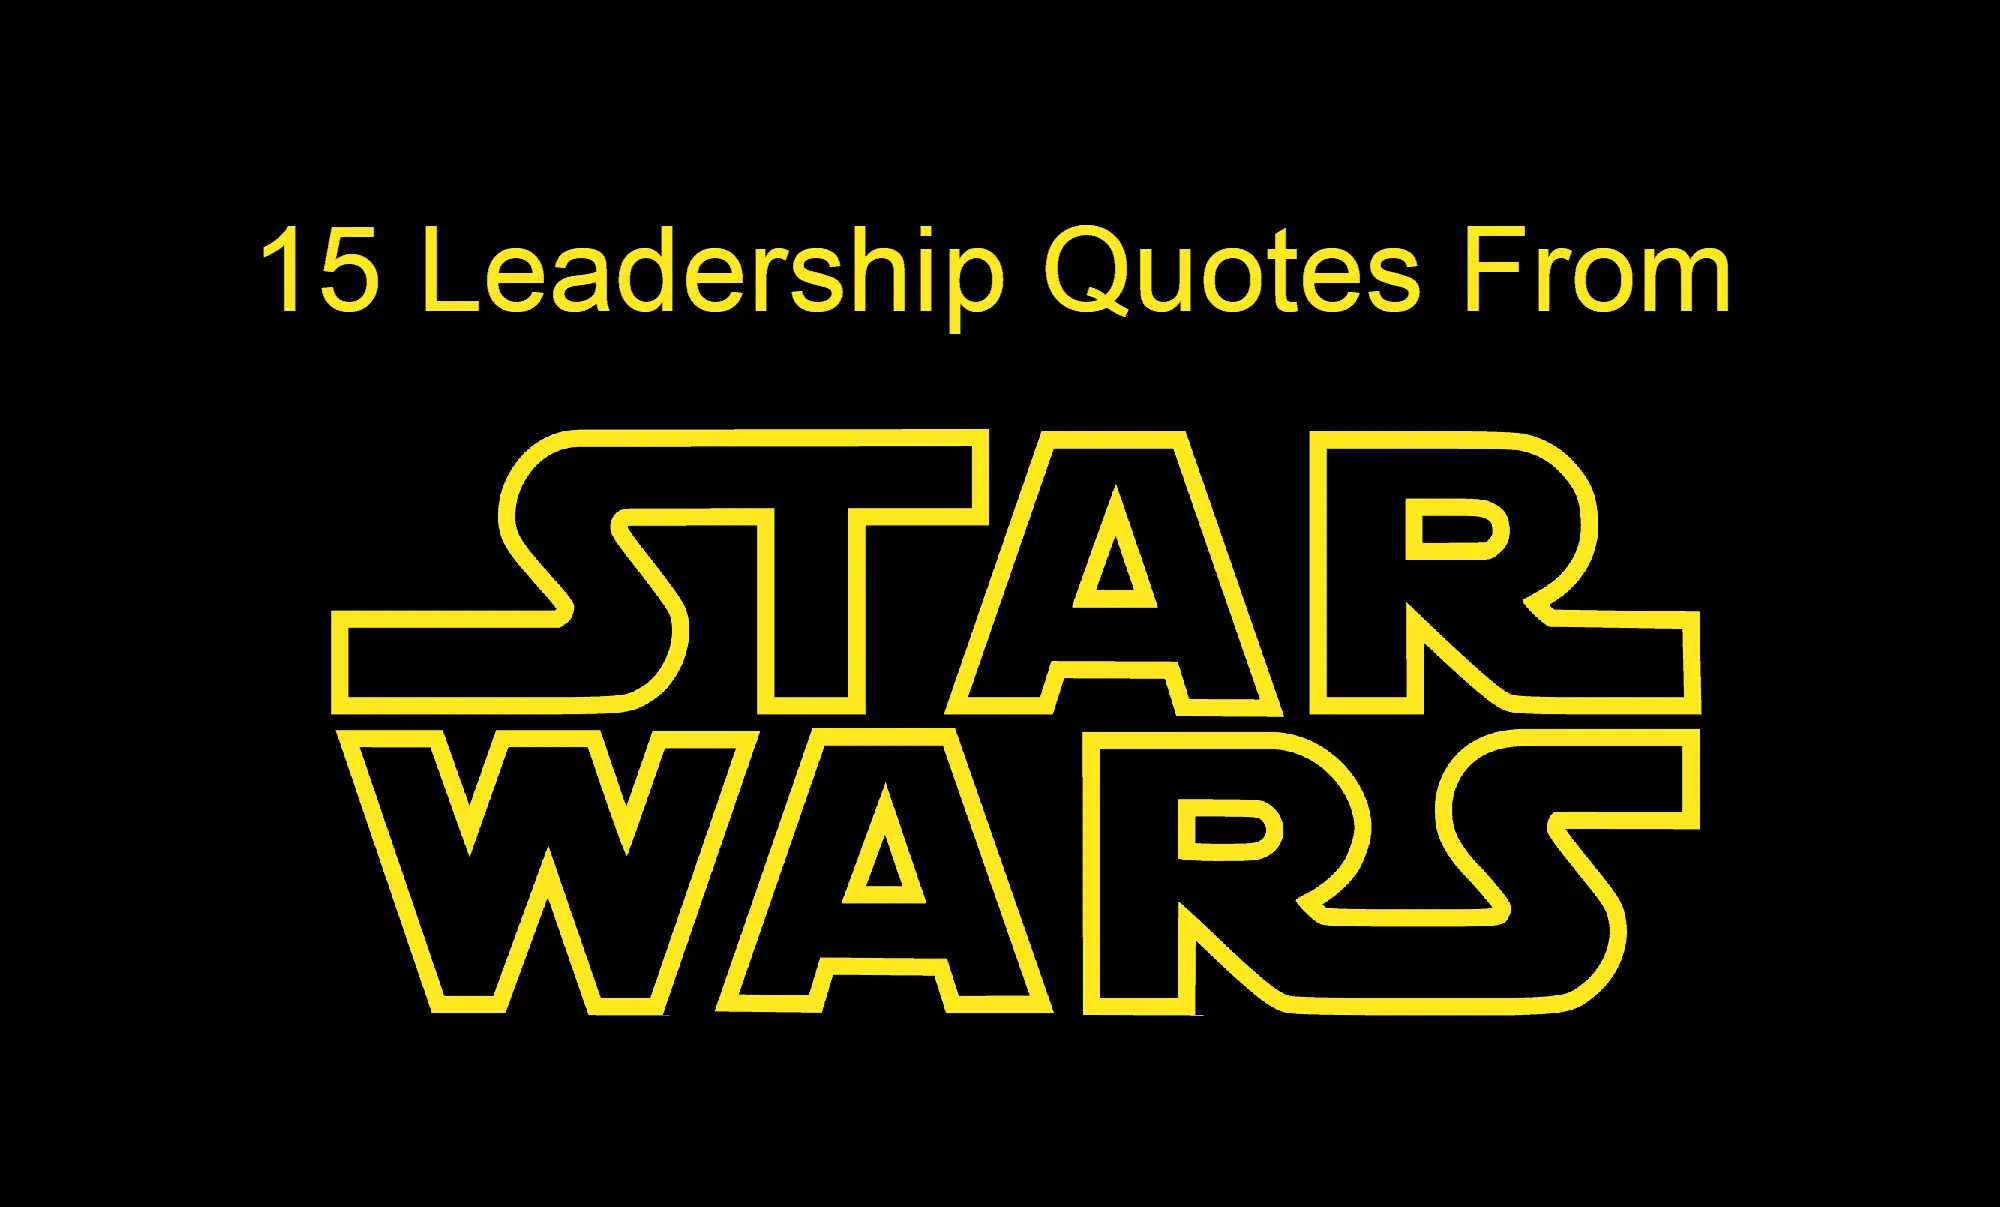 15 Leadership Quotes From Star Wars For Star Wars Day - Joseph Lalonde